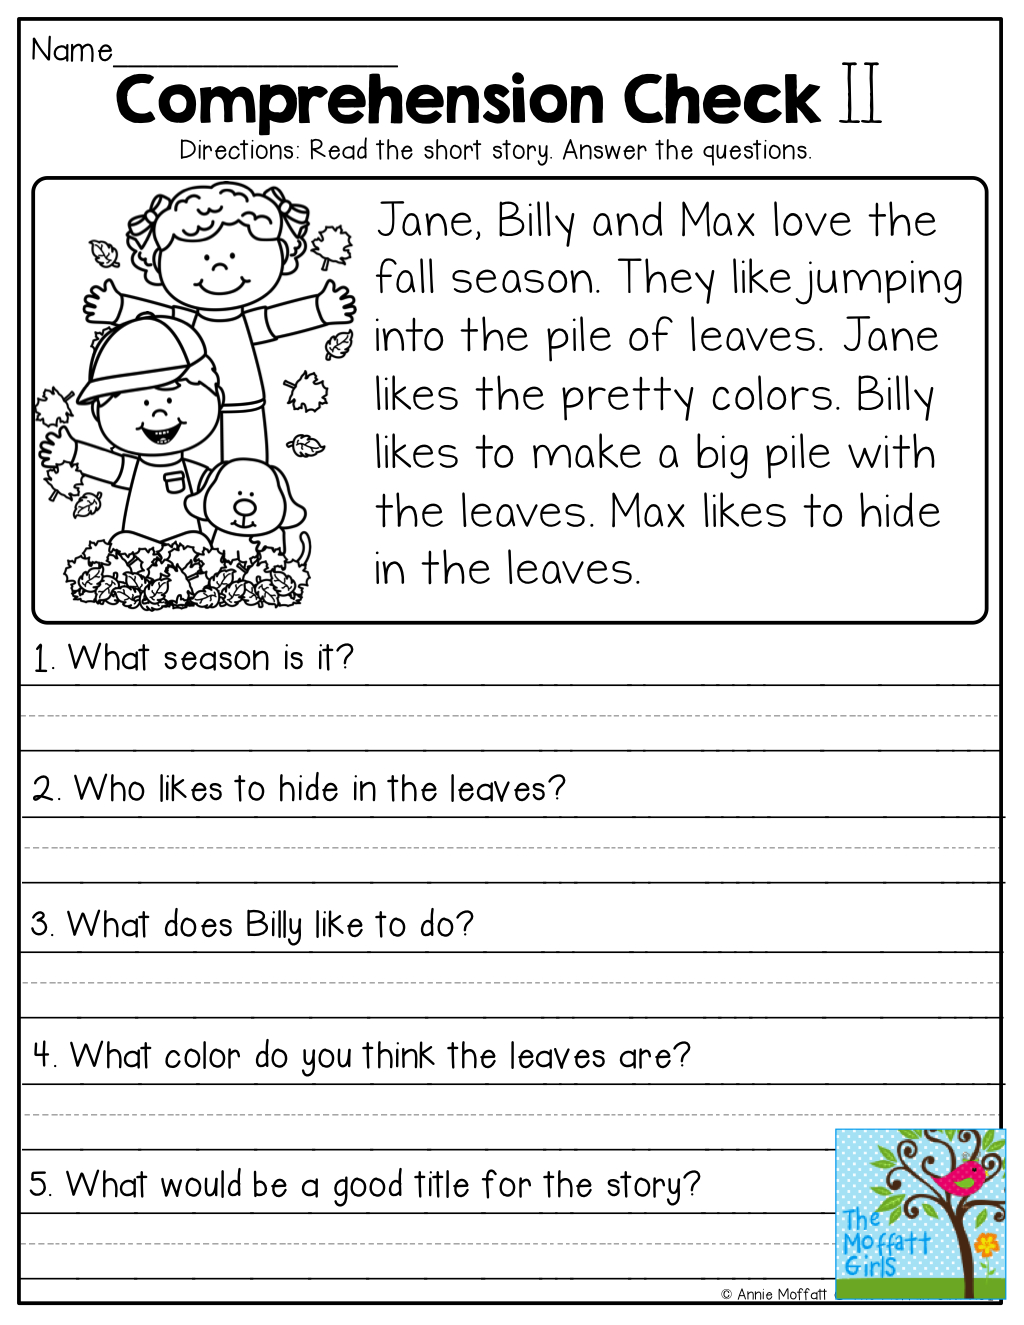 Comprehension Checks And So Many More Useful Printables! | Reading - Free Printable Short Stories With Comprehension Questions